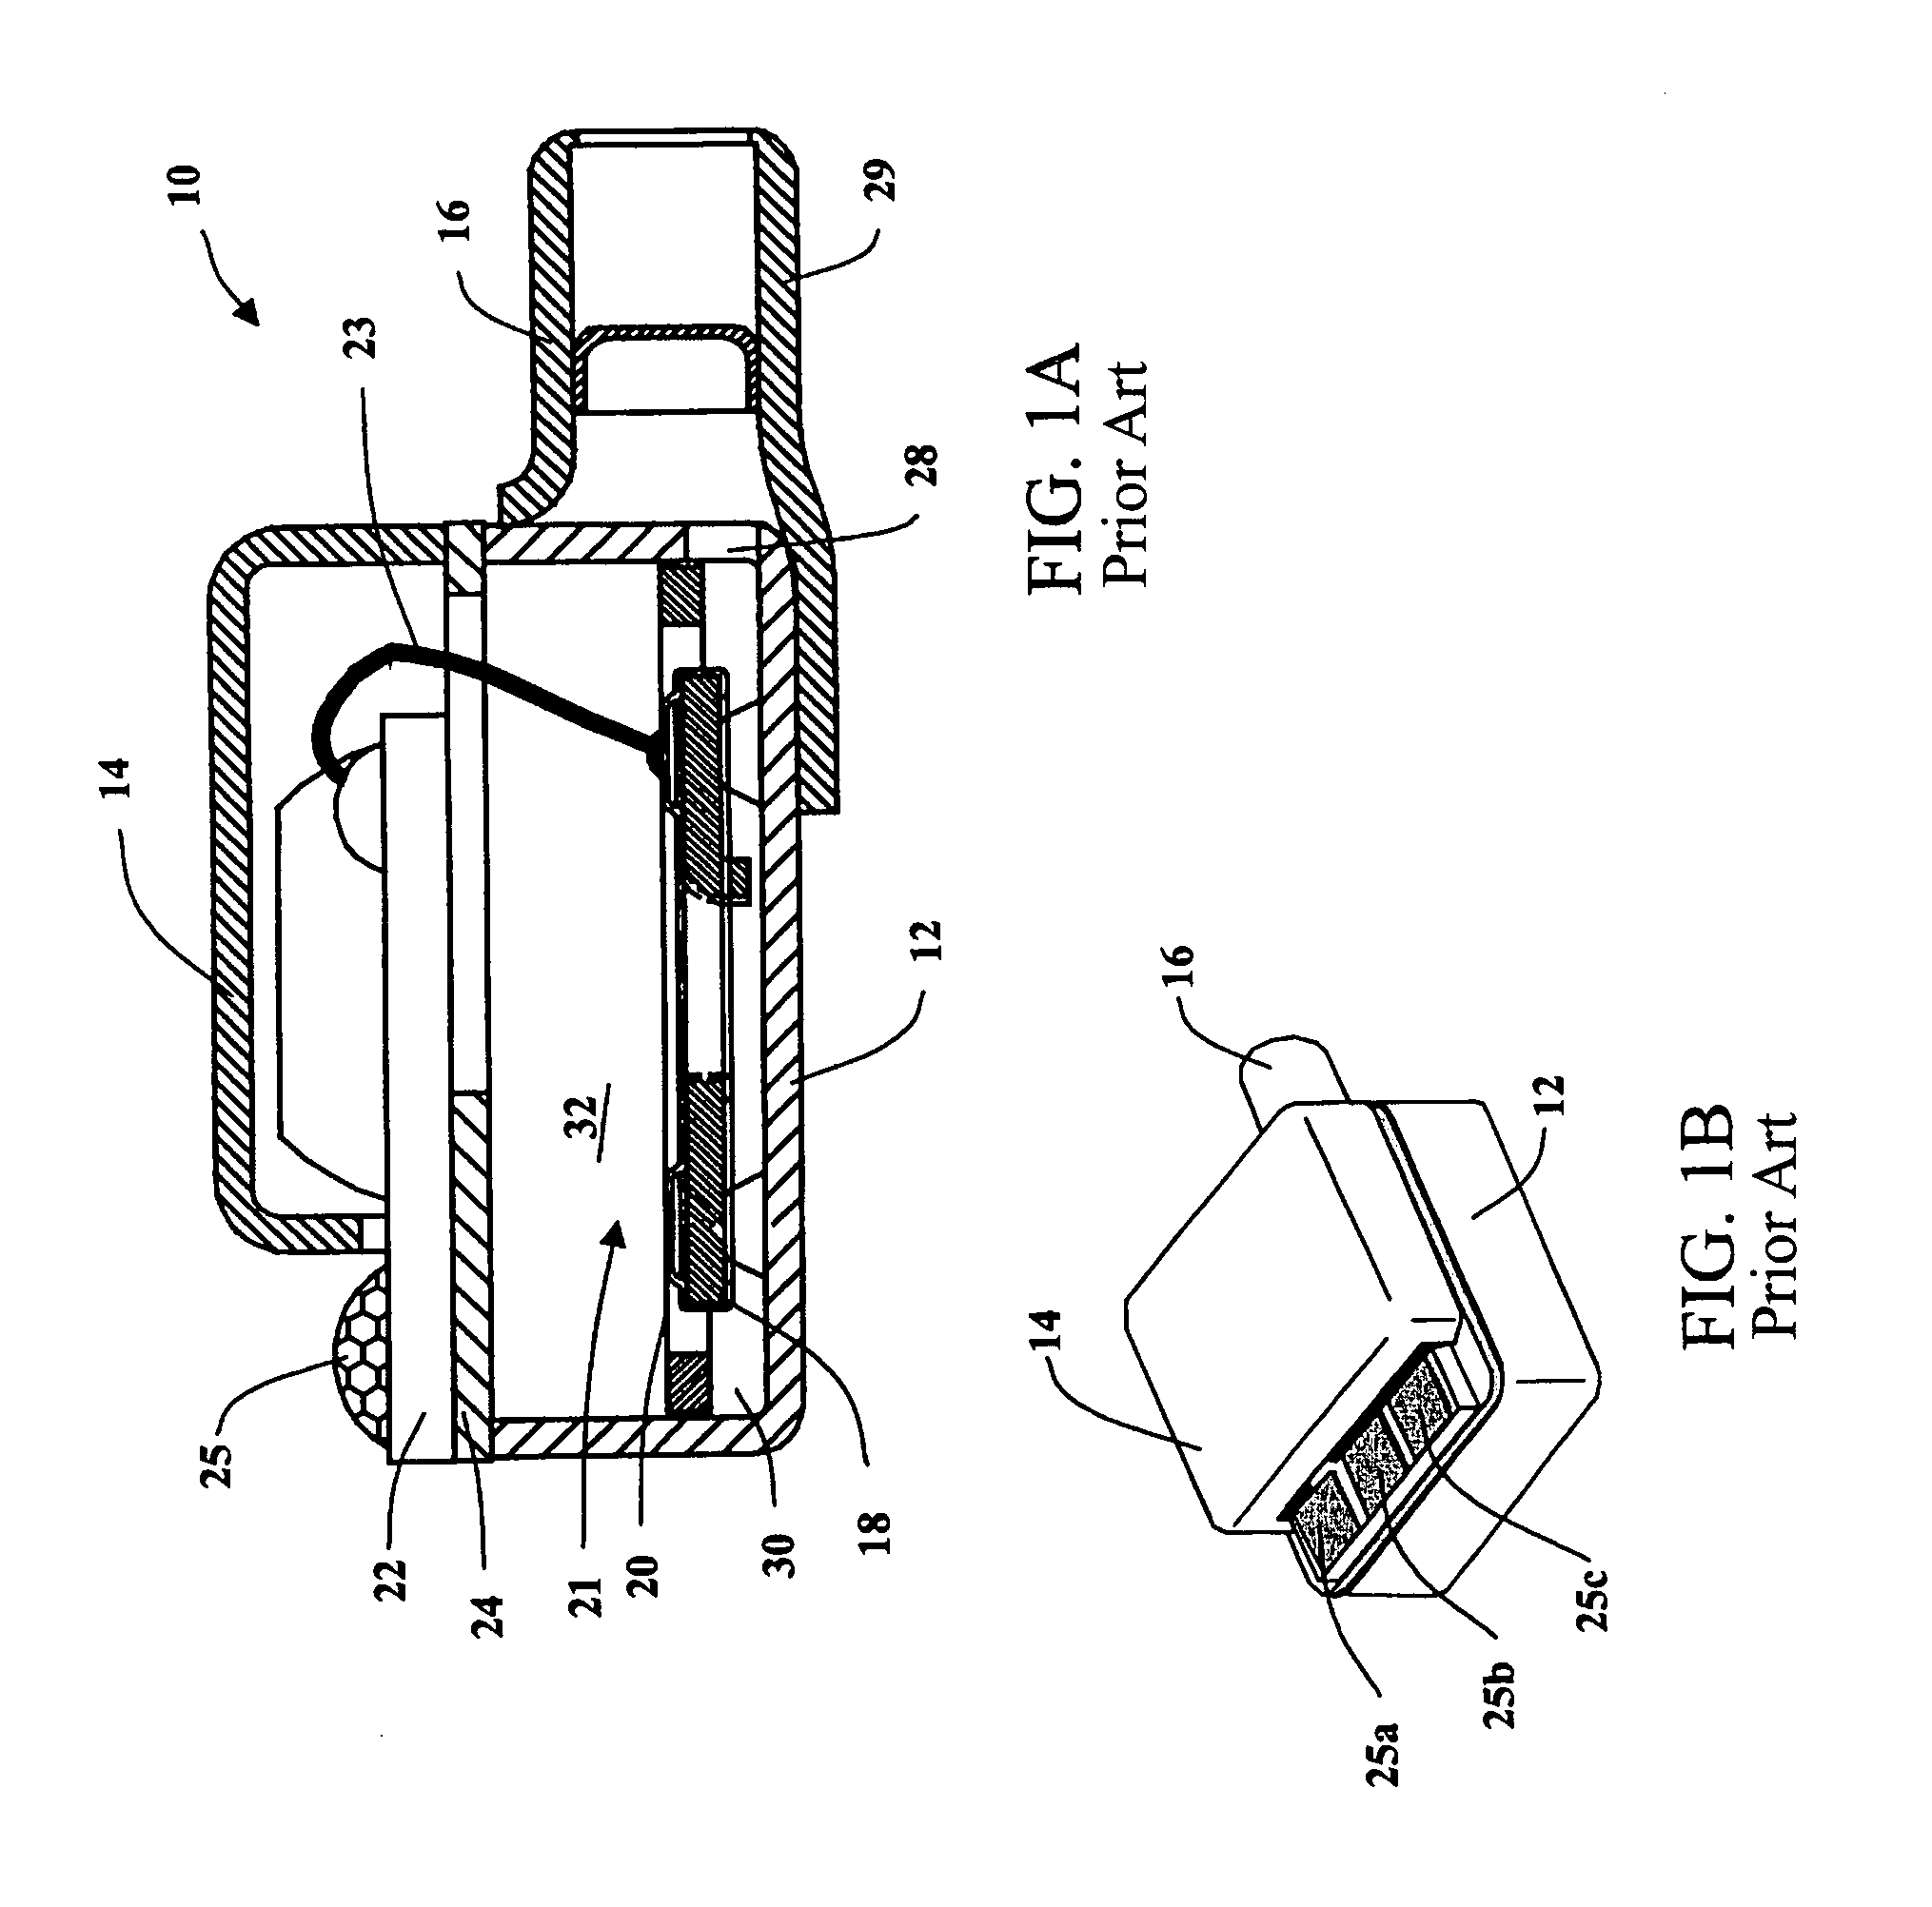 Microphone with improved sound inlet port